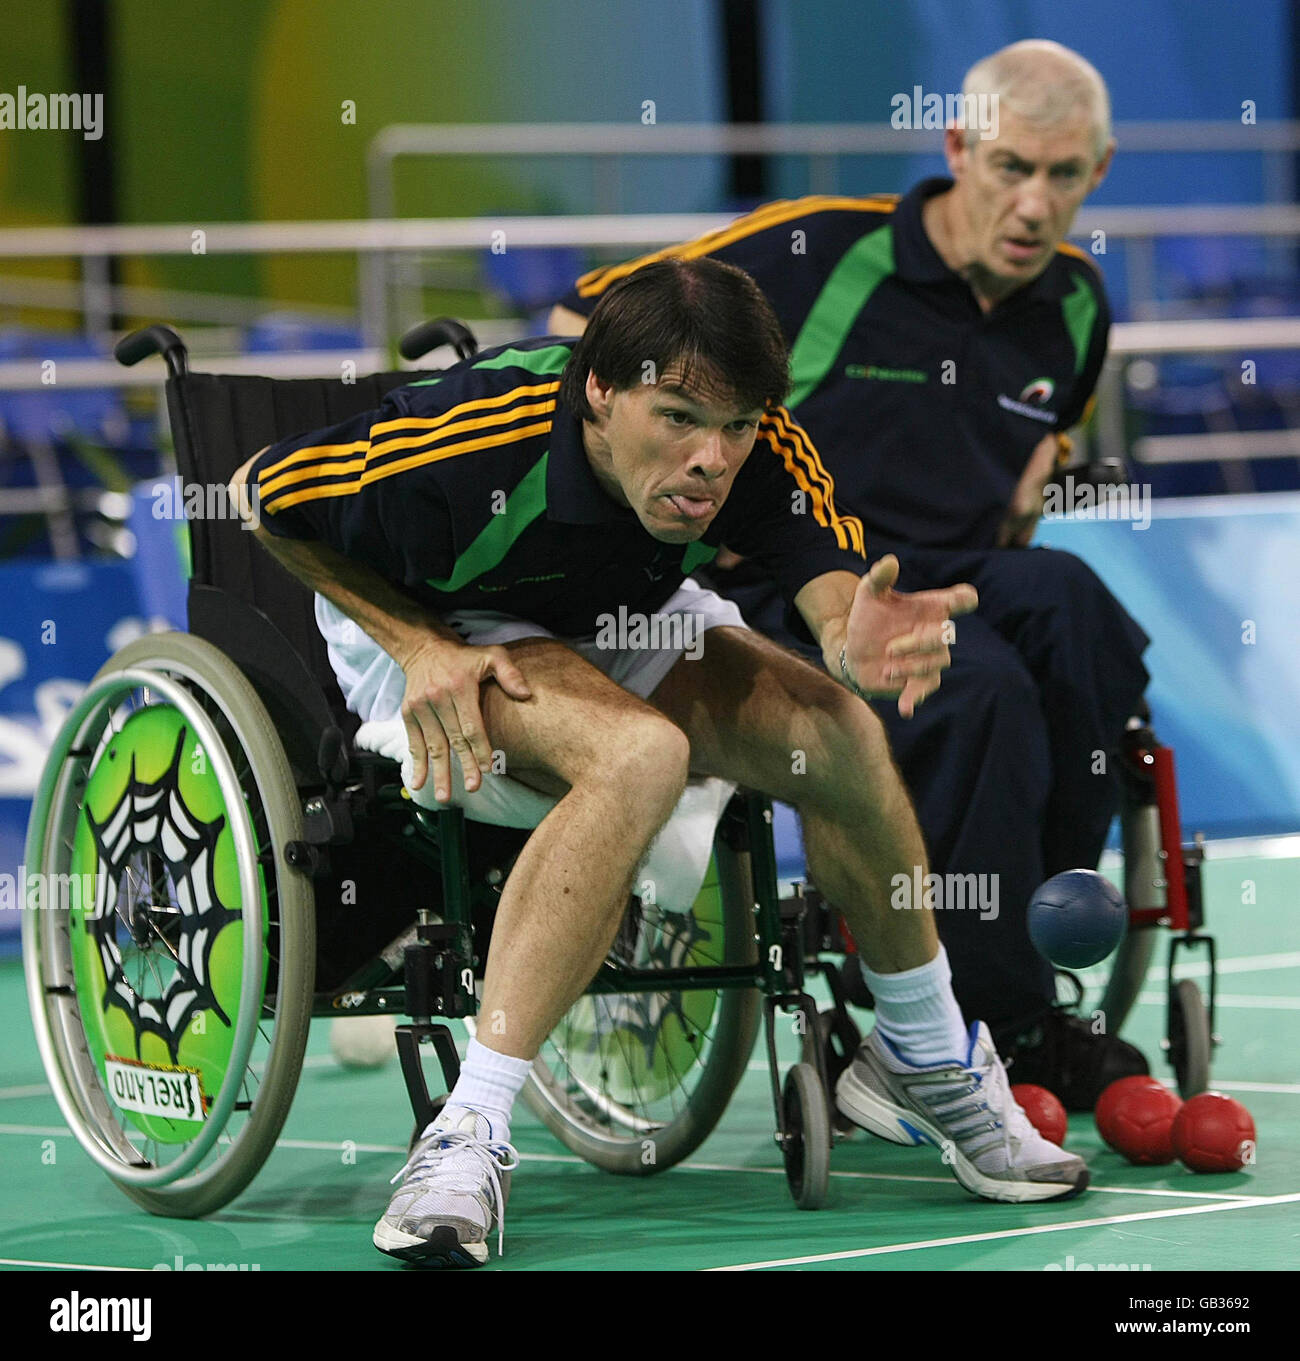 Irish Paralympic athletes Gabriel Shelly competing in the Boccia event with Thomas Leahy (right) in the Fencing Hall of National Convention Center in Beijing, China. Stock Photo